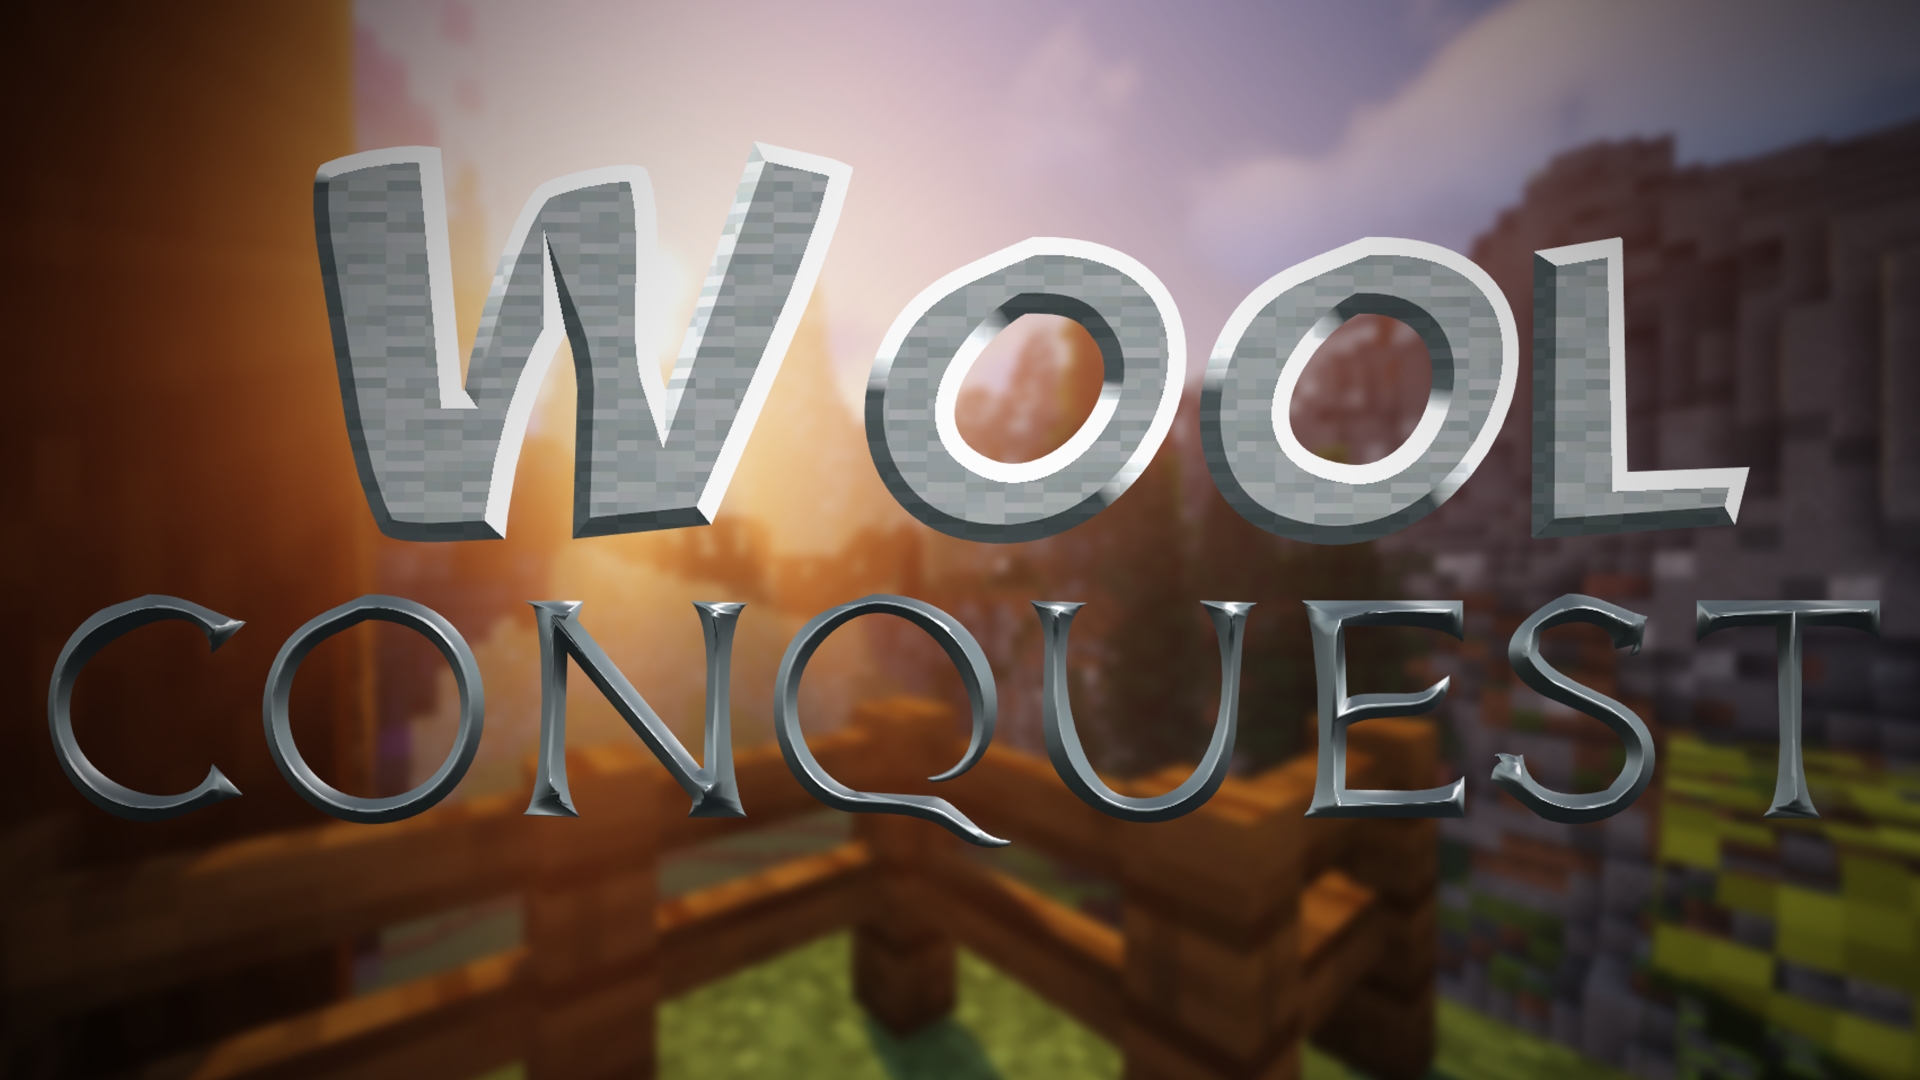 Wool Conquest